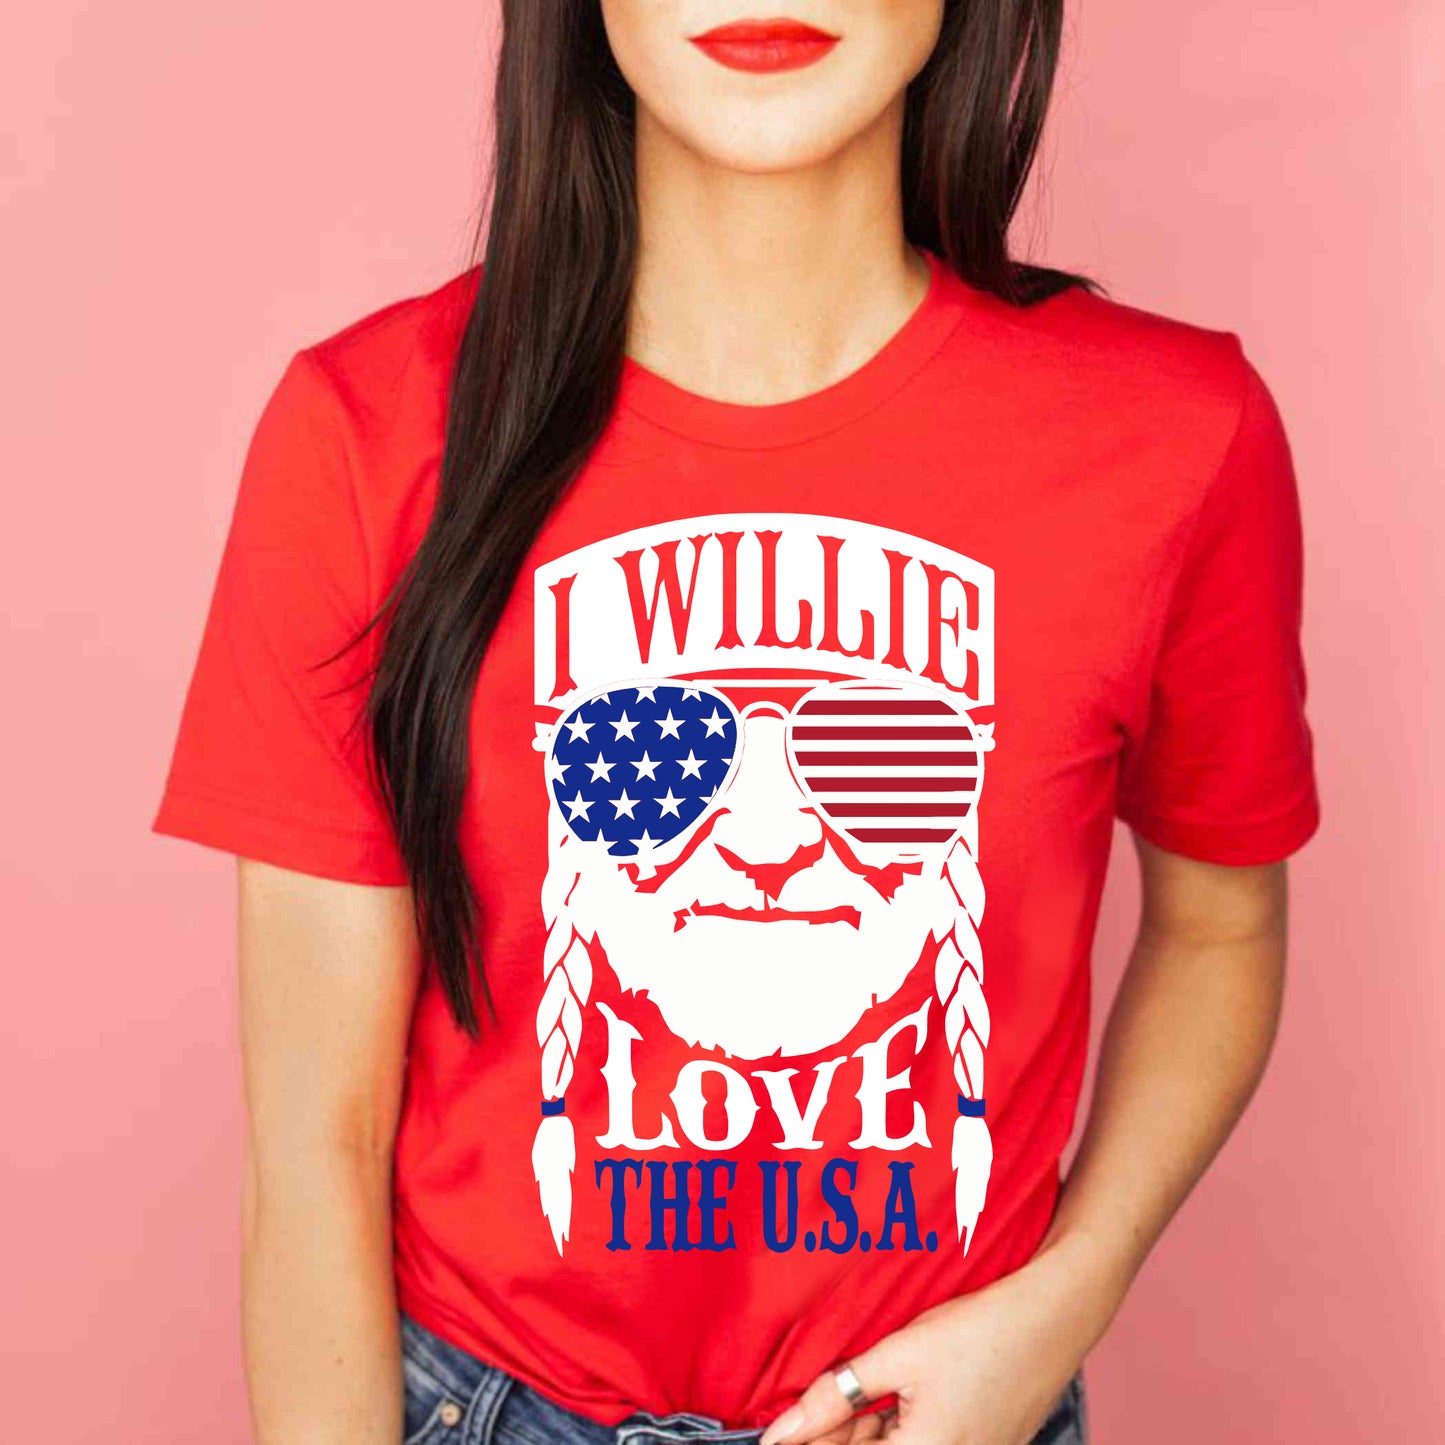 I Willie Love the USA, How About You?